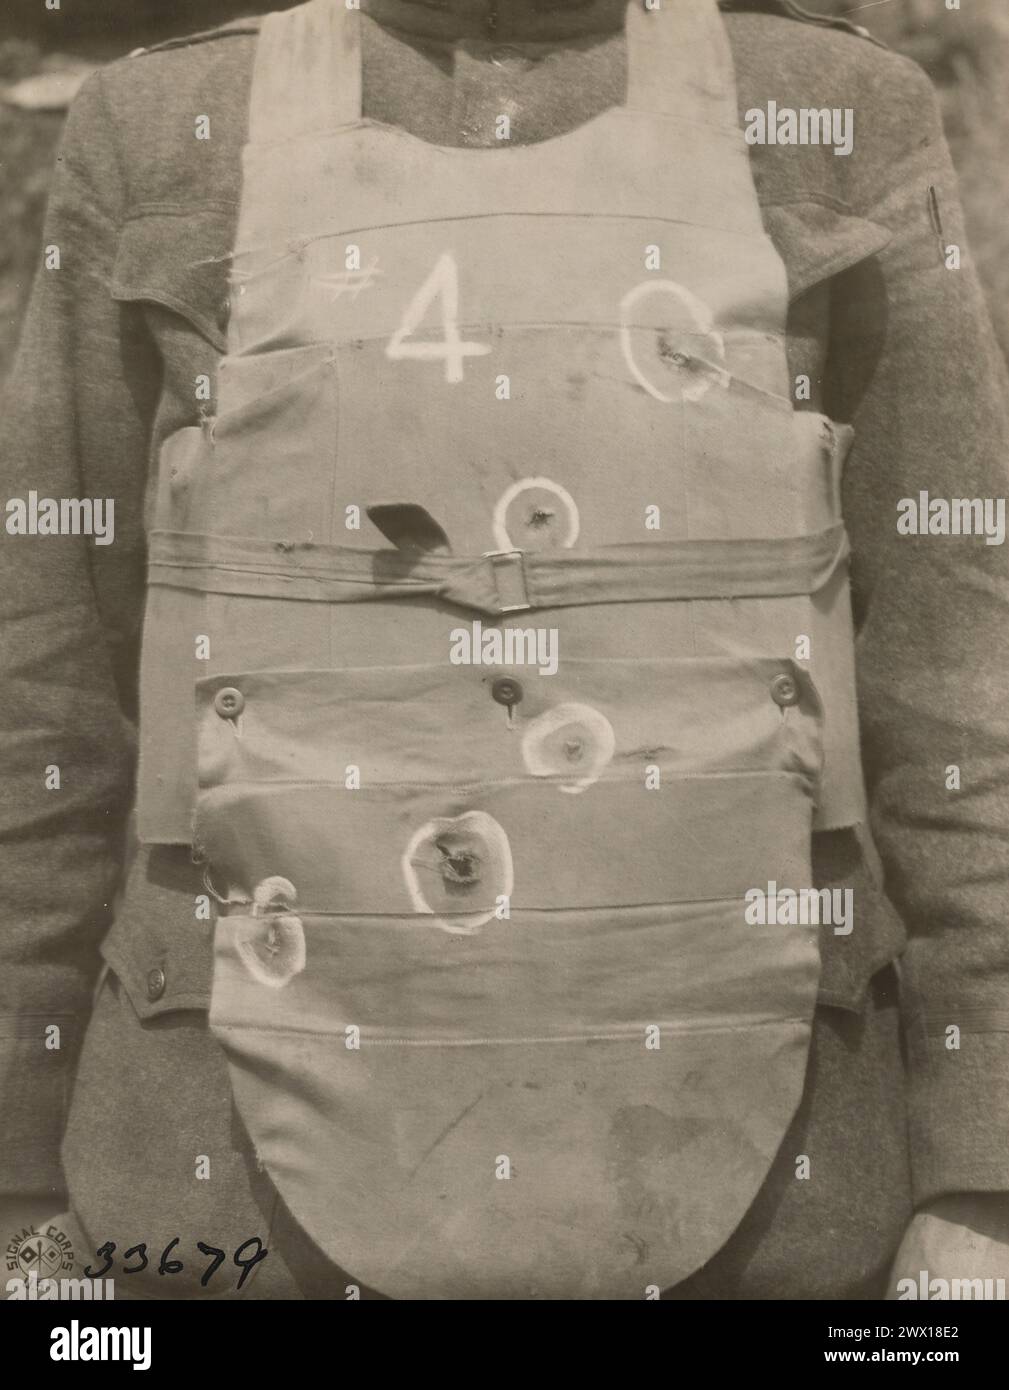 Result of a body armor test - Light weight 7 lbs 10 oz, .45 caliber pistol fired at 15 and 25 yards resulted in dents up to 1/4 inch, no penetration ca. 1918 Stock Photo